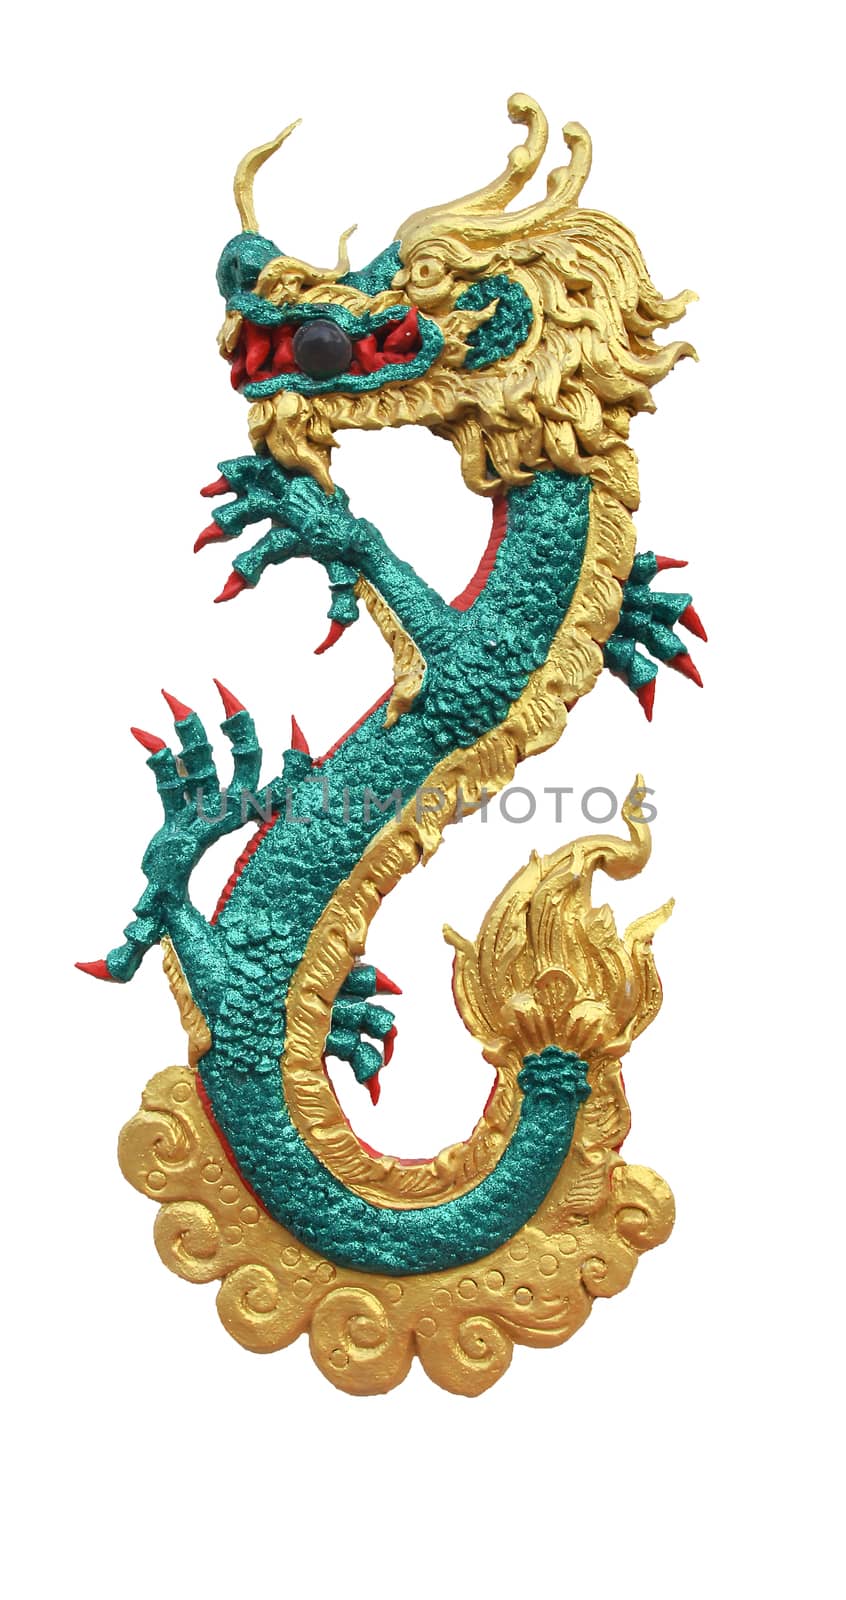 Traditional thai and china style art of dragon by pumppump